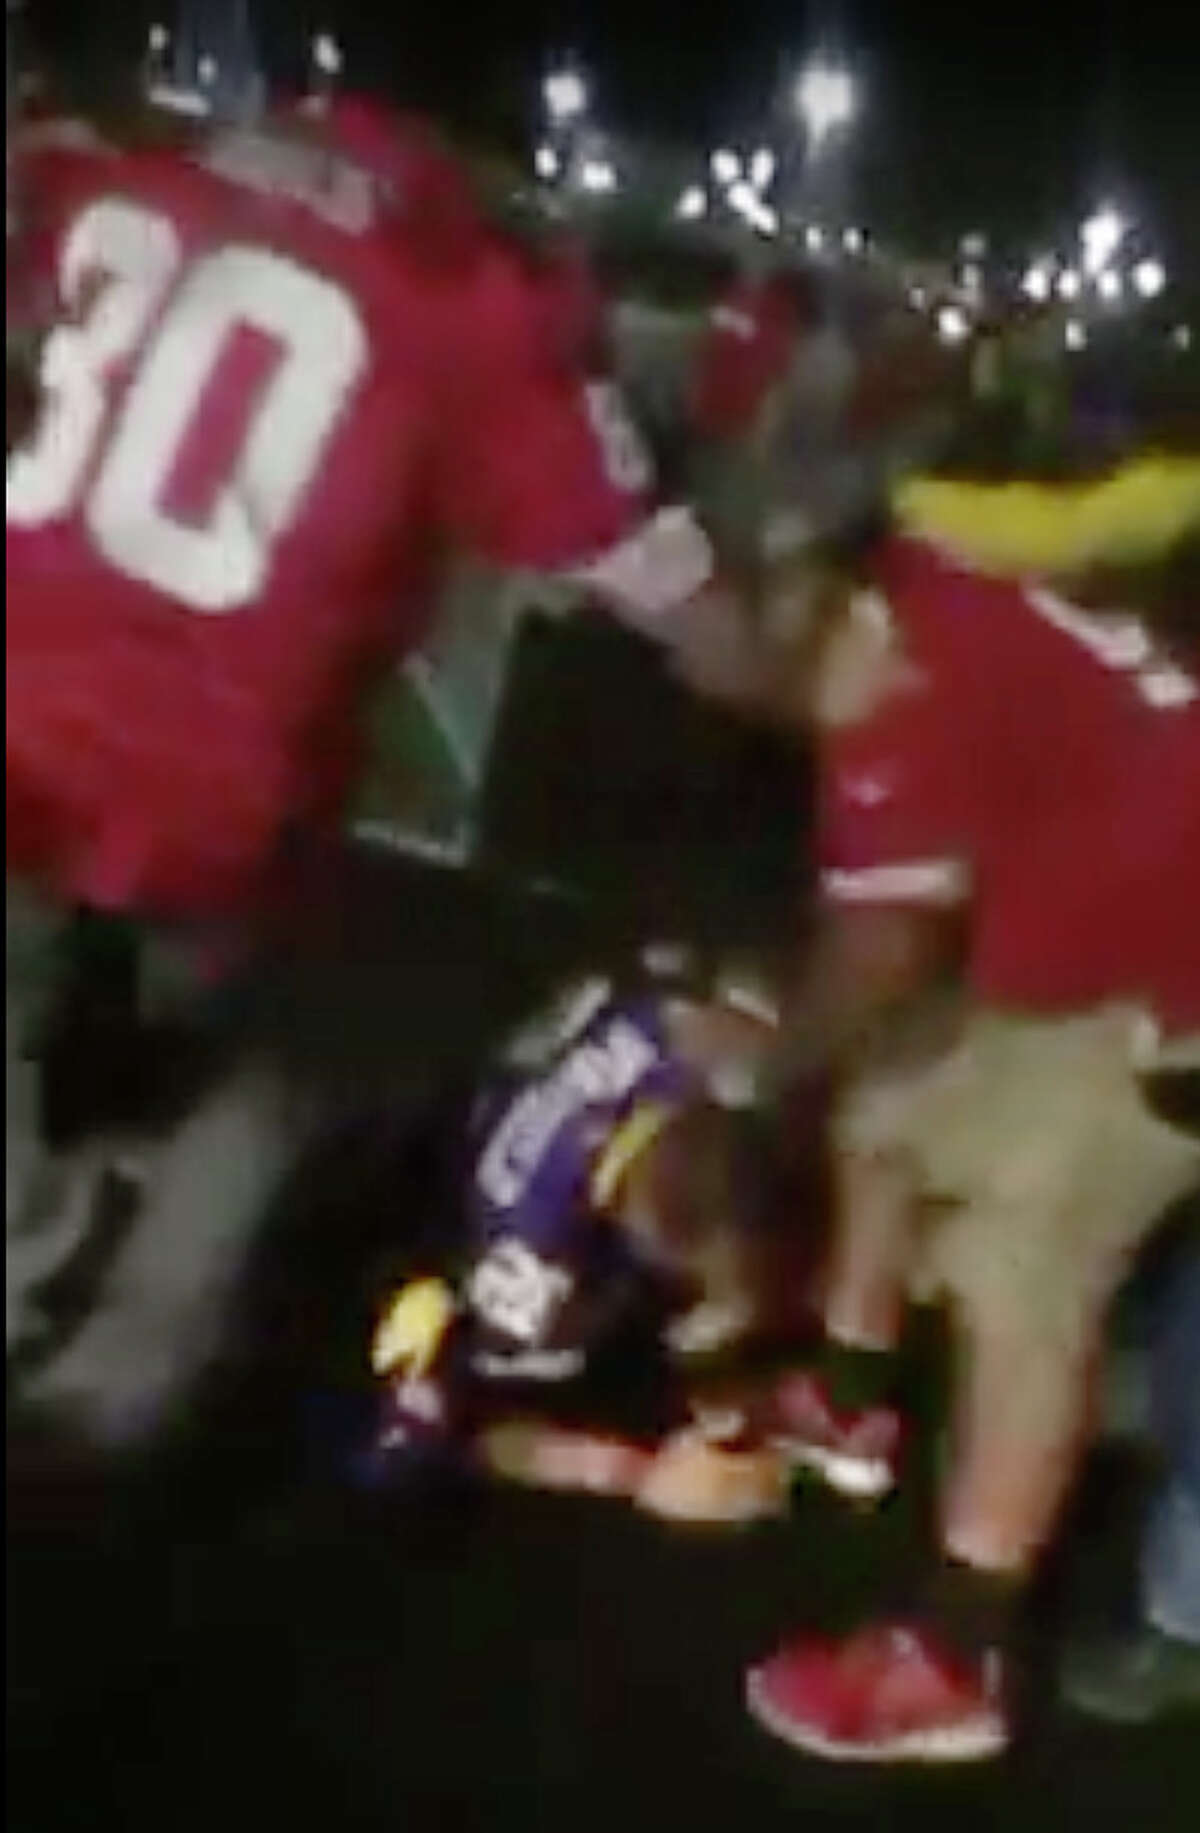 Fans' post-game fight outside Levi's Stadium caught on video